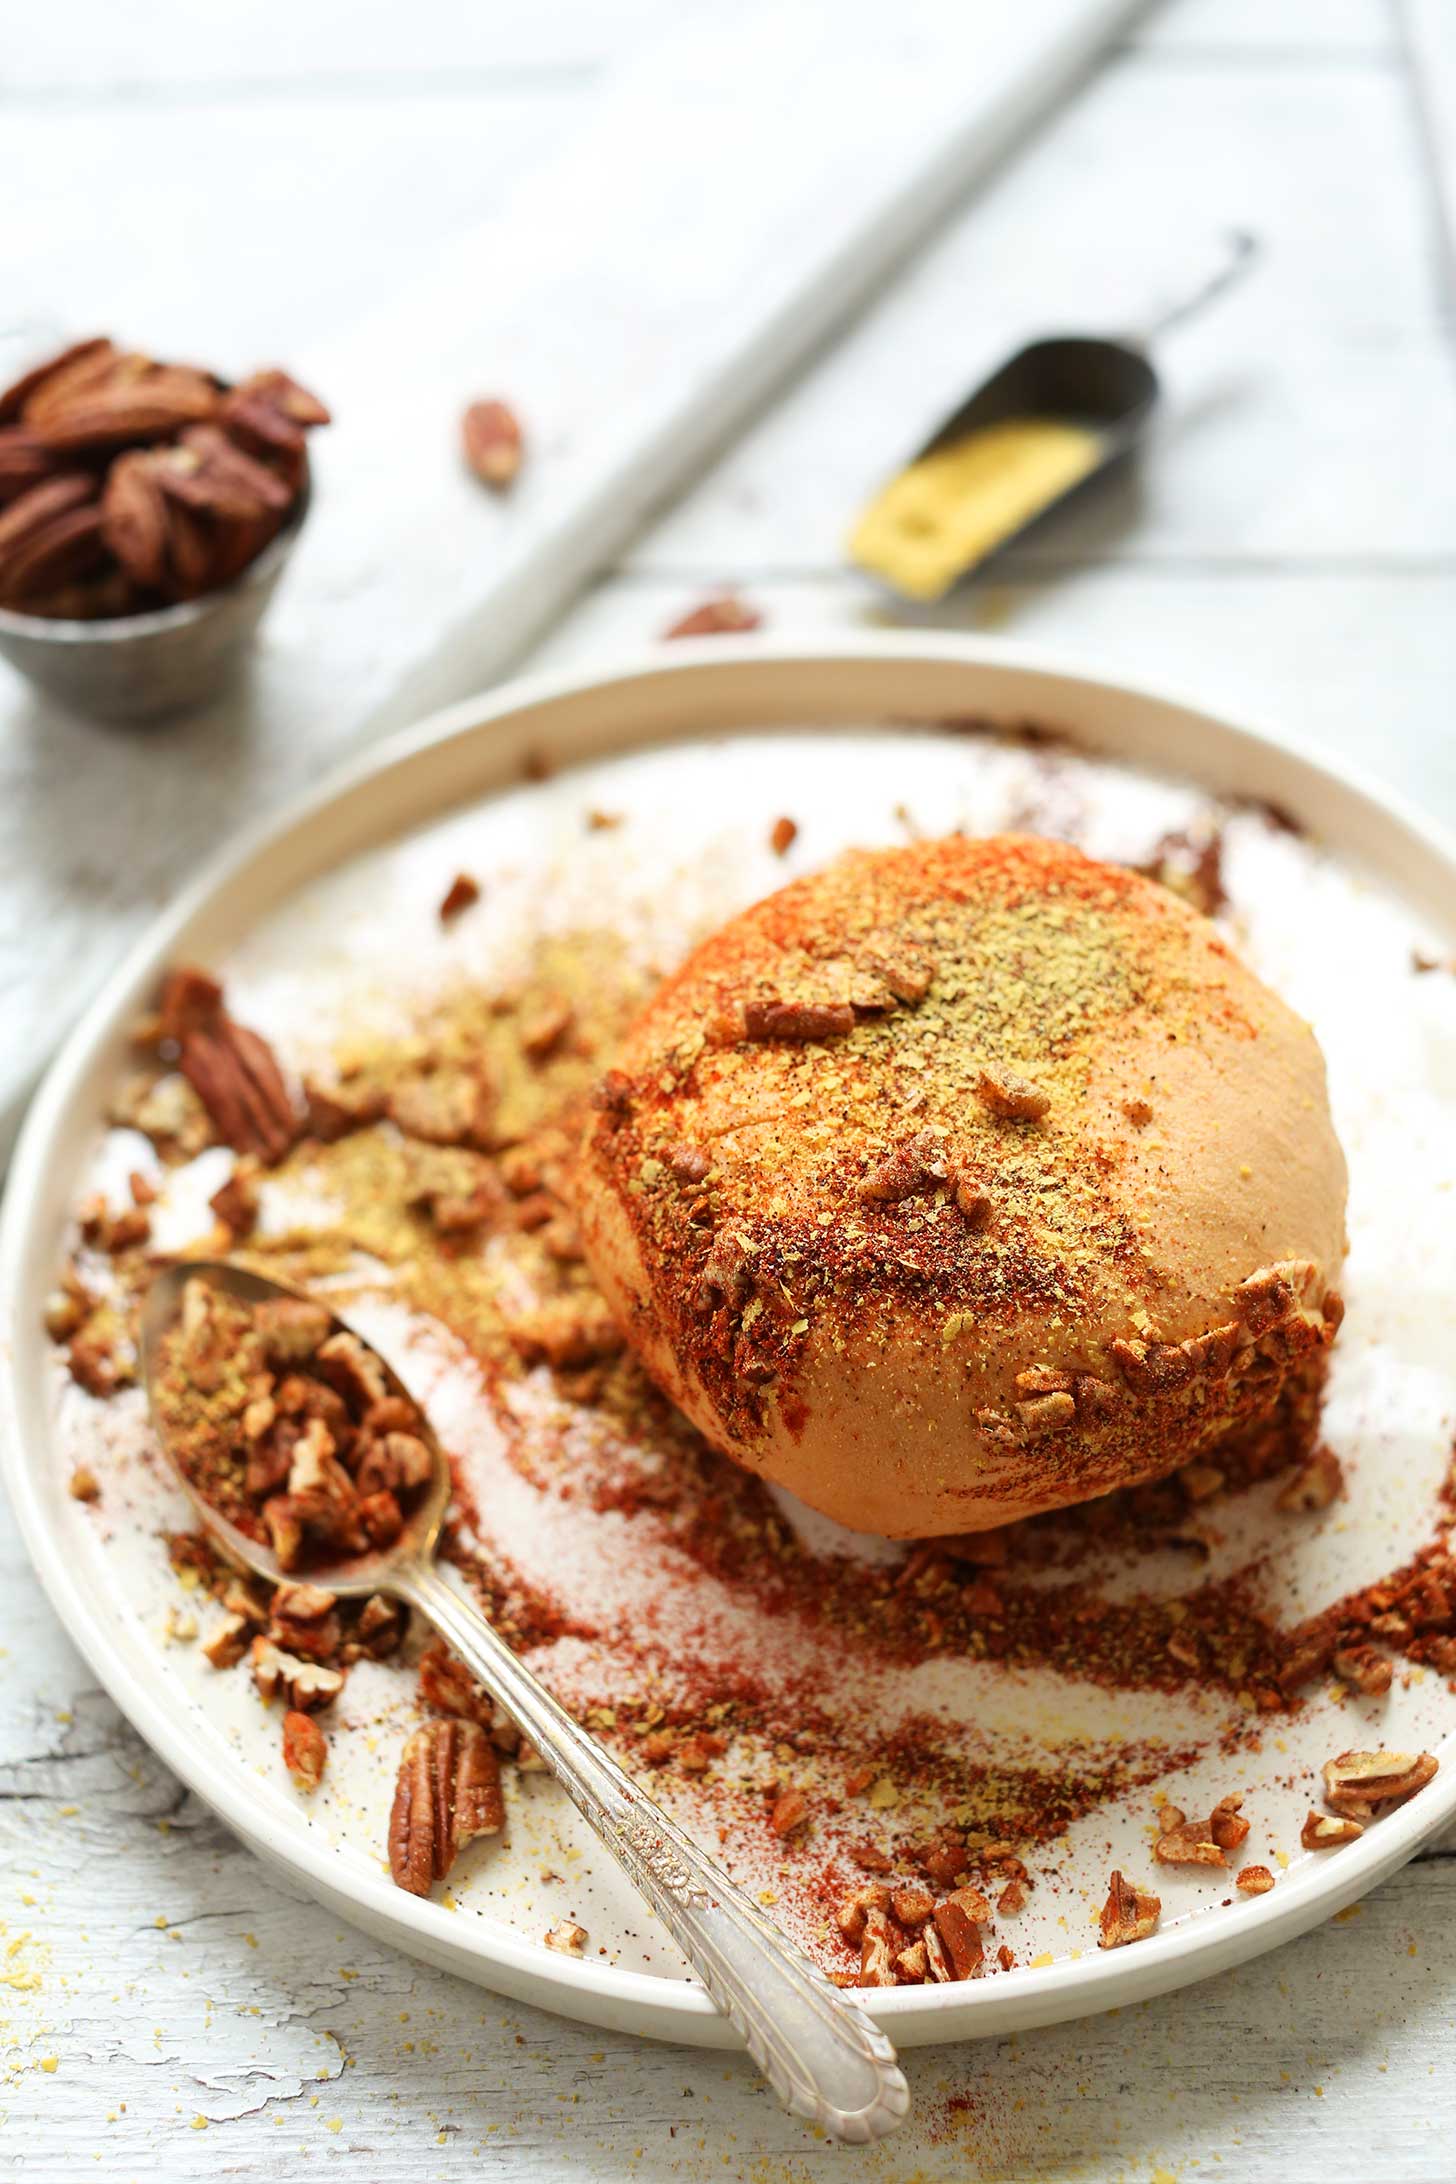 Plate with Spicy Vegan Cheese Ball topped with nuts and spices